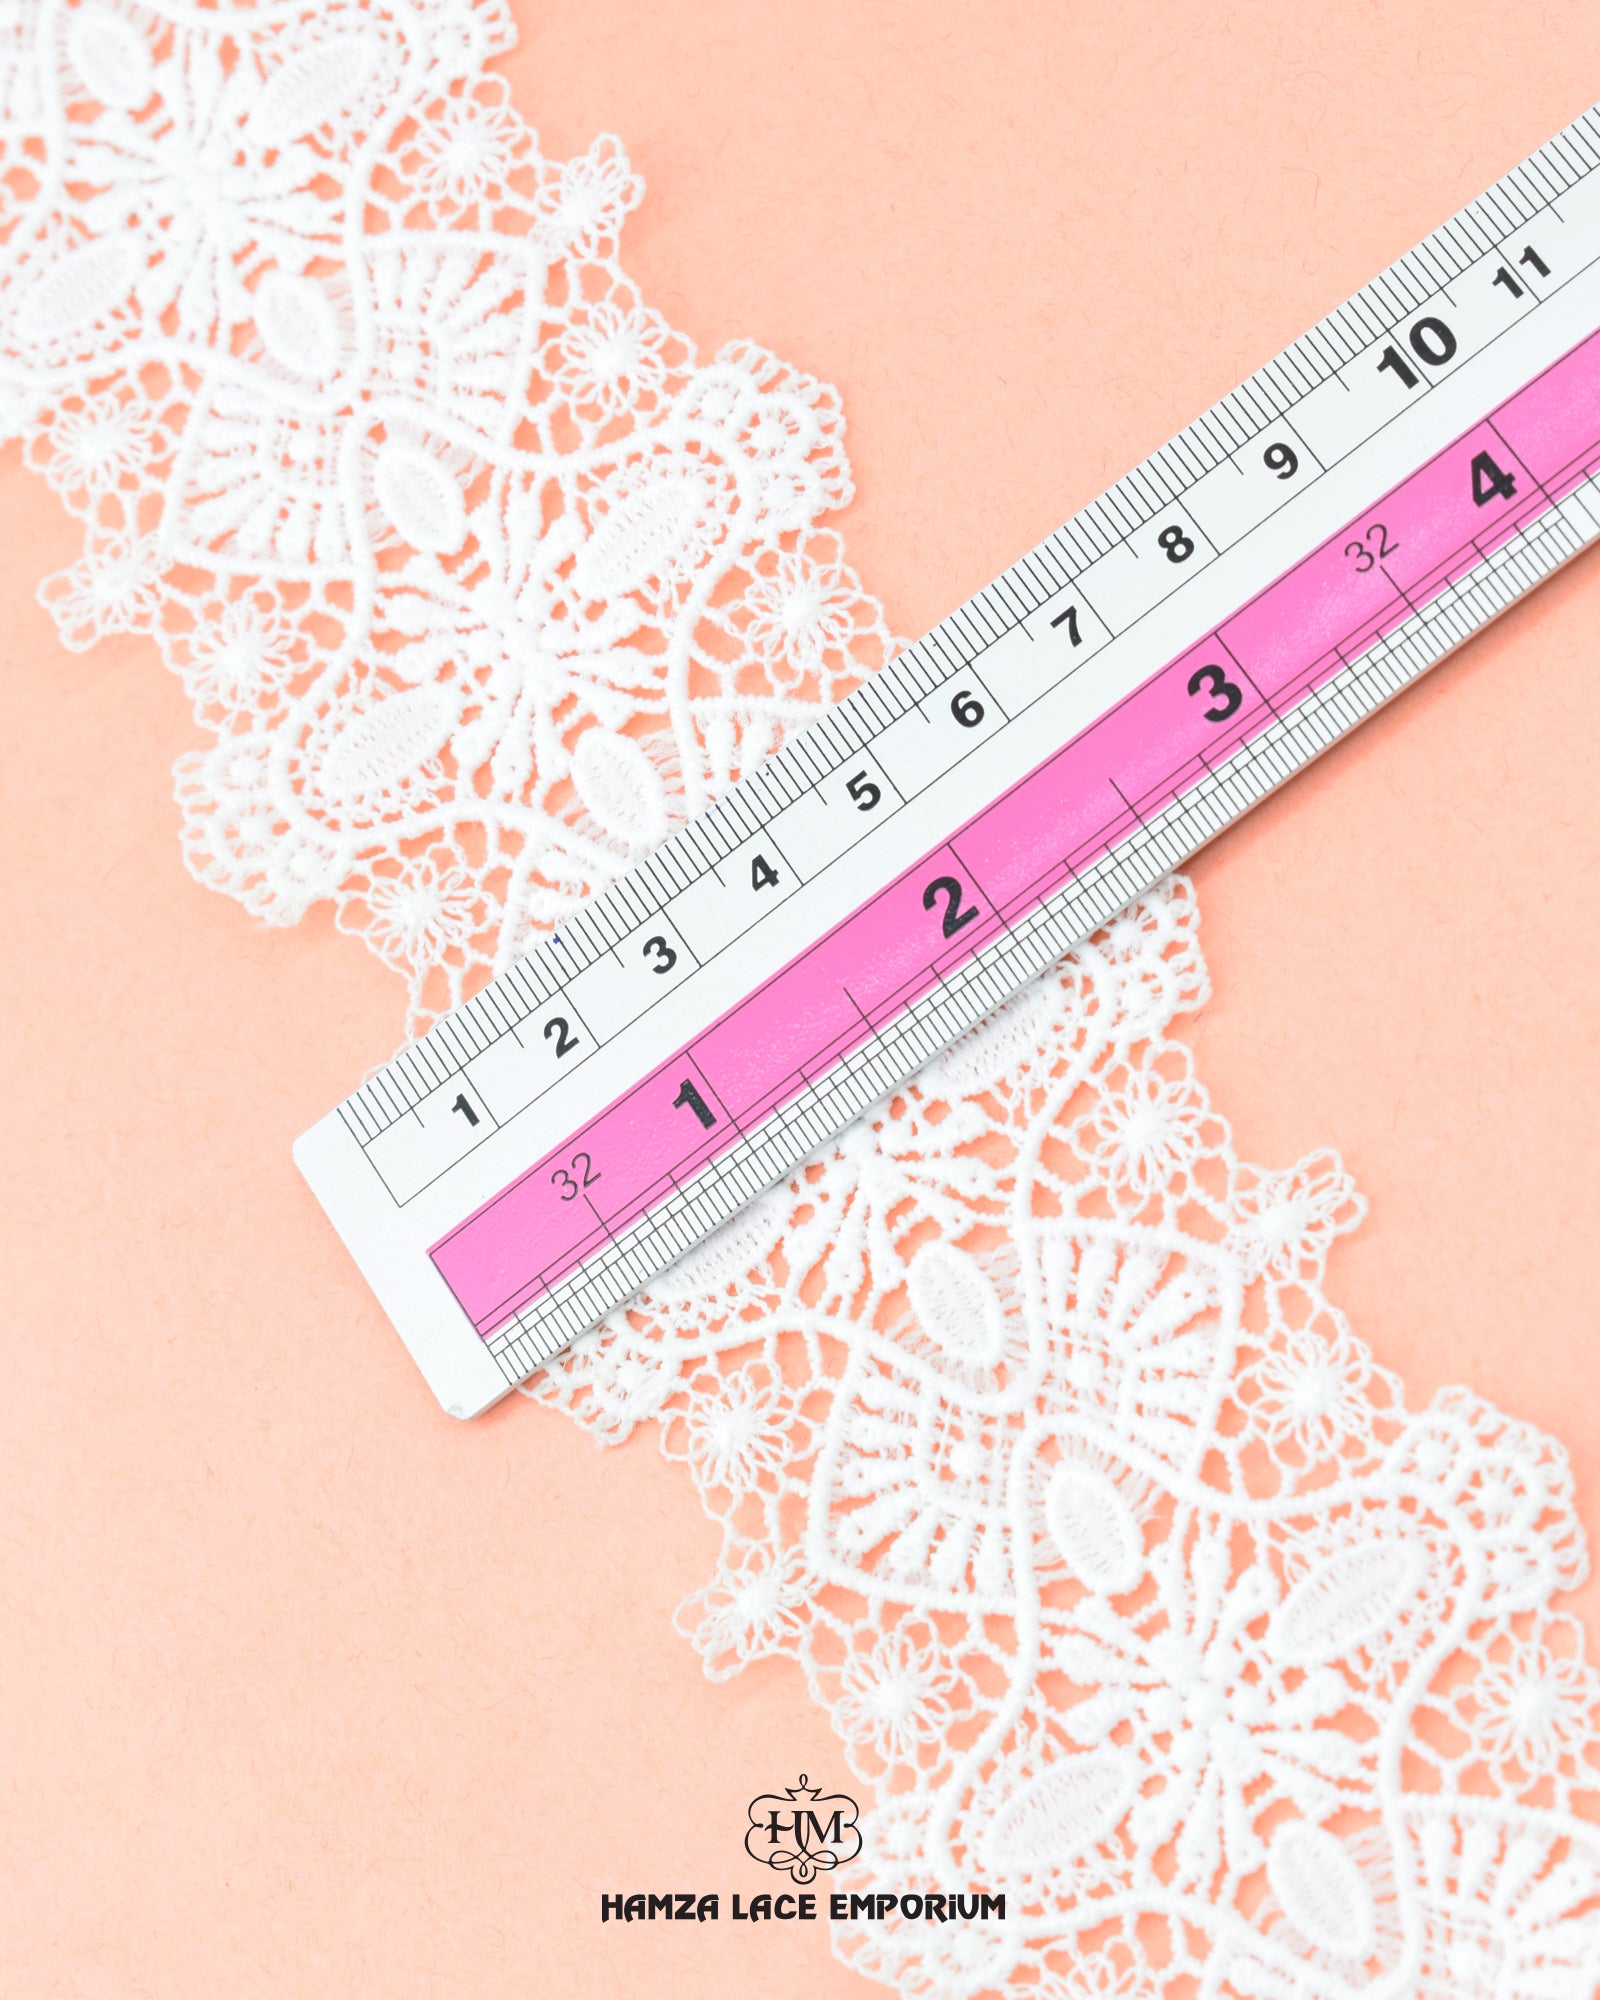 The size of the 'Center Filling Lace 23013' is given as '2.5' inches by placing a ruler on it